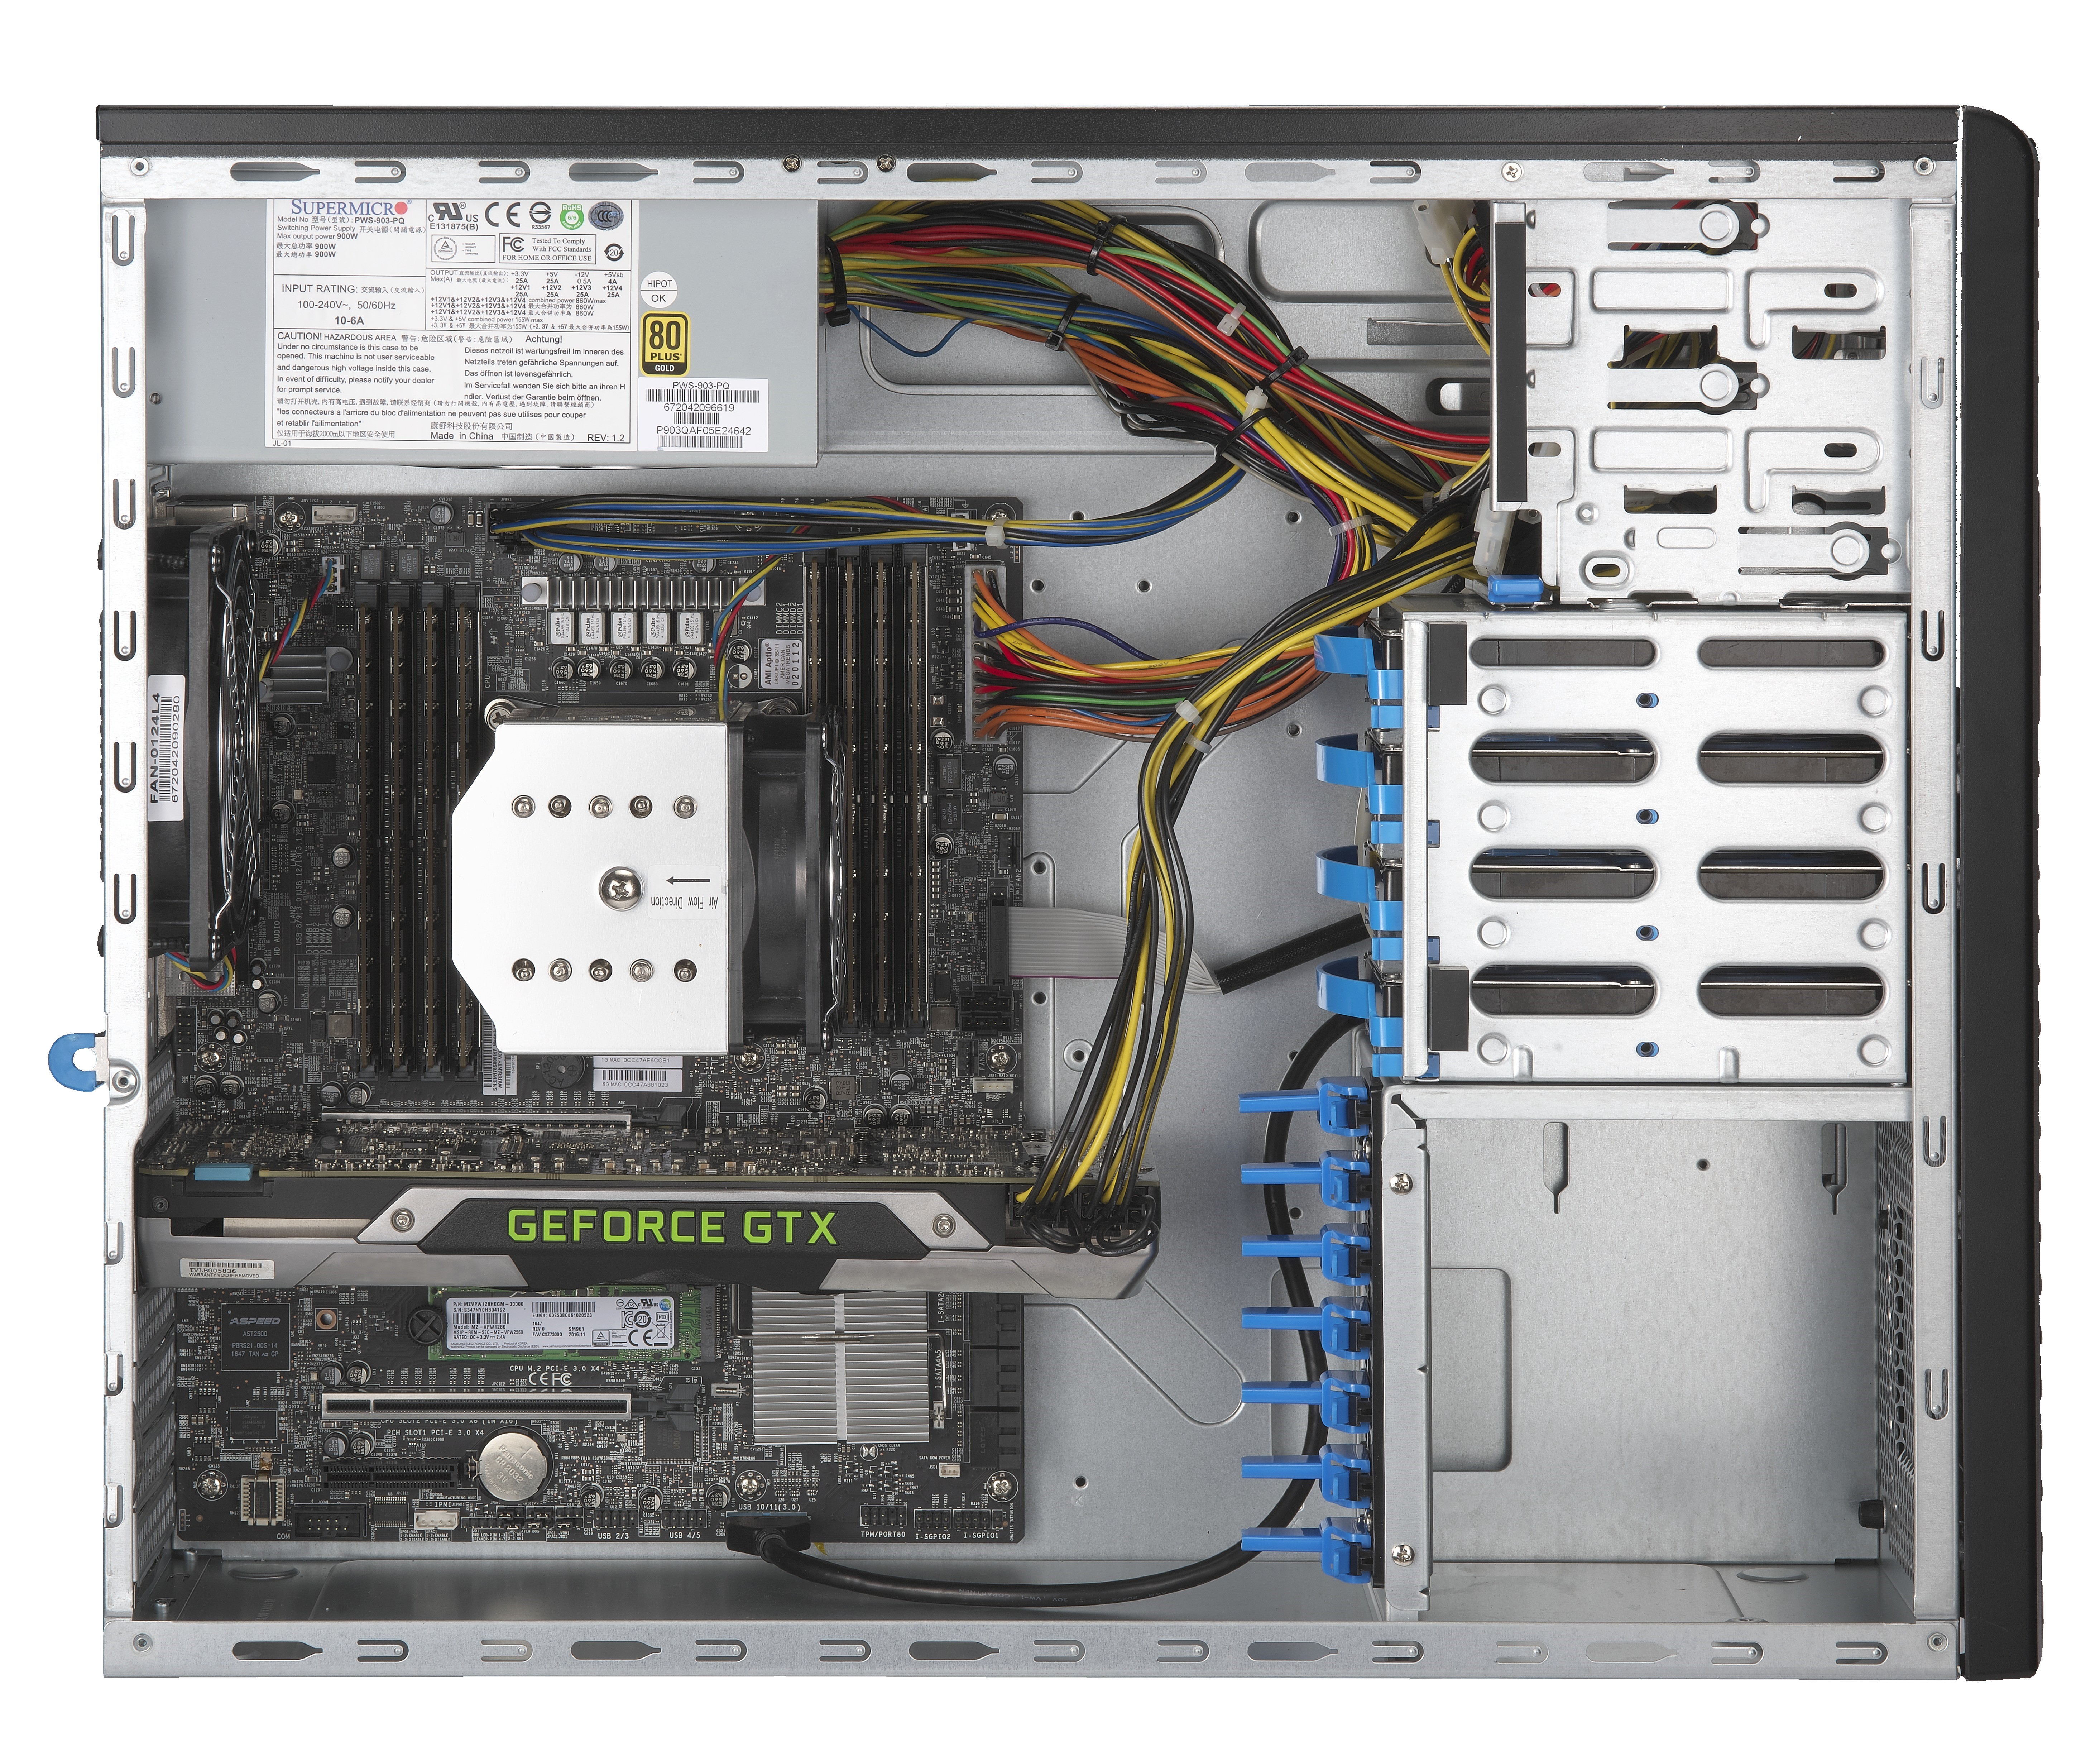 Supermicro SYS-5039A-i Mid Tower Intel Xeon W